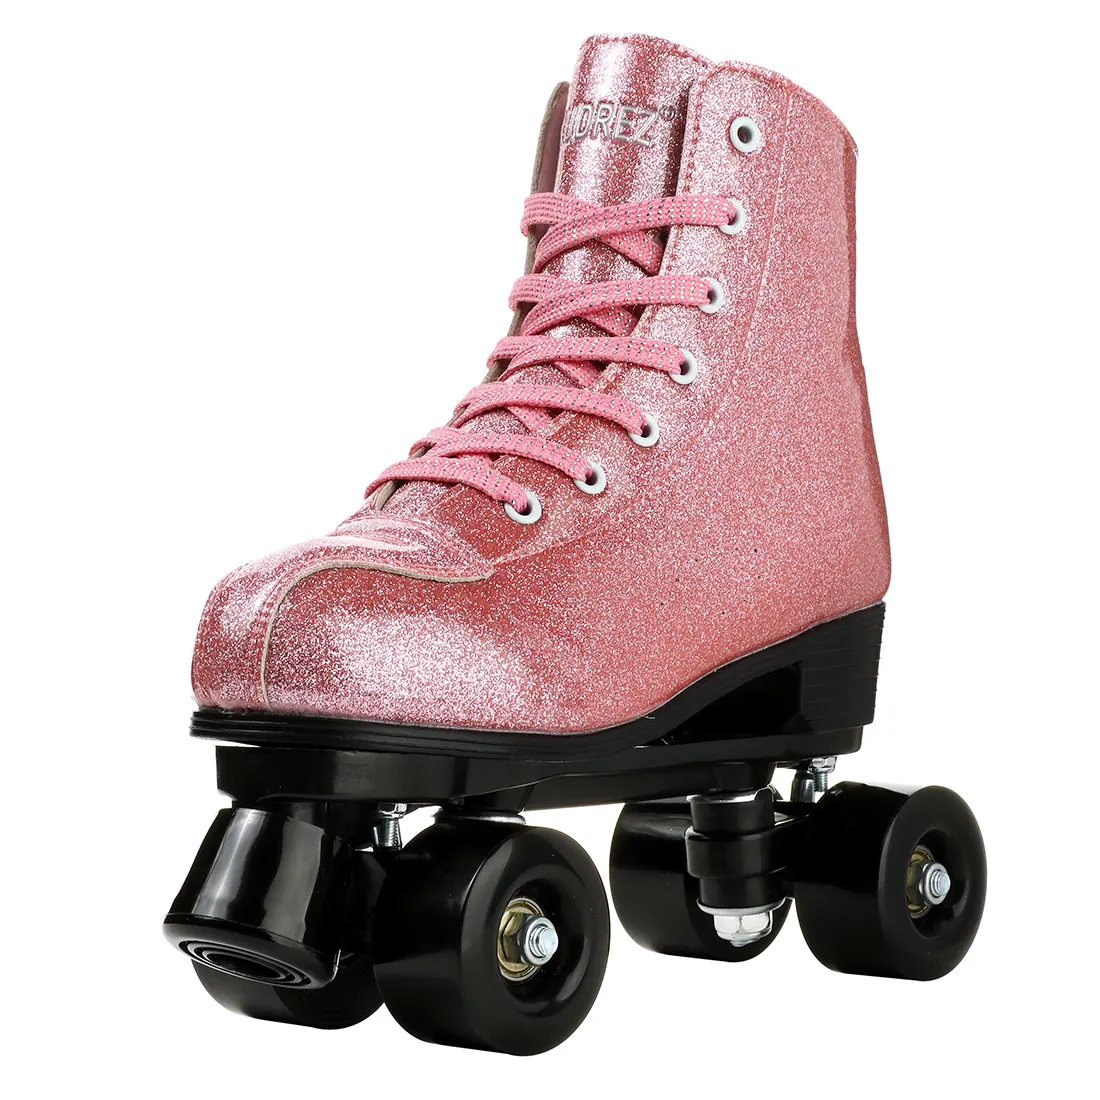 Women's Classic Roller Skates Light Up Wheels Artificial Leather Adjustable Double Row Four-Wheel Roller Skates Shiny Skates for Unisex 